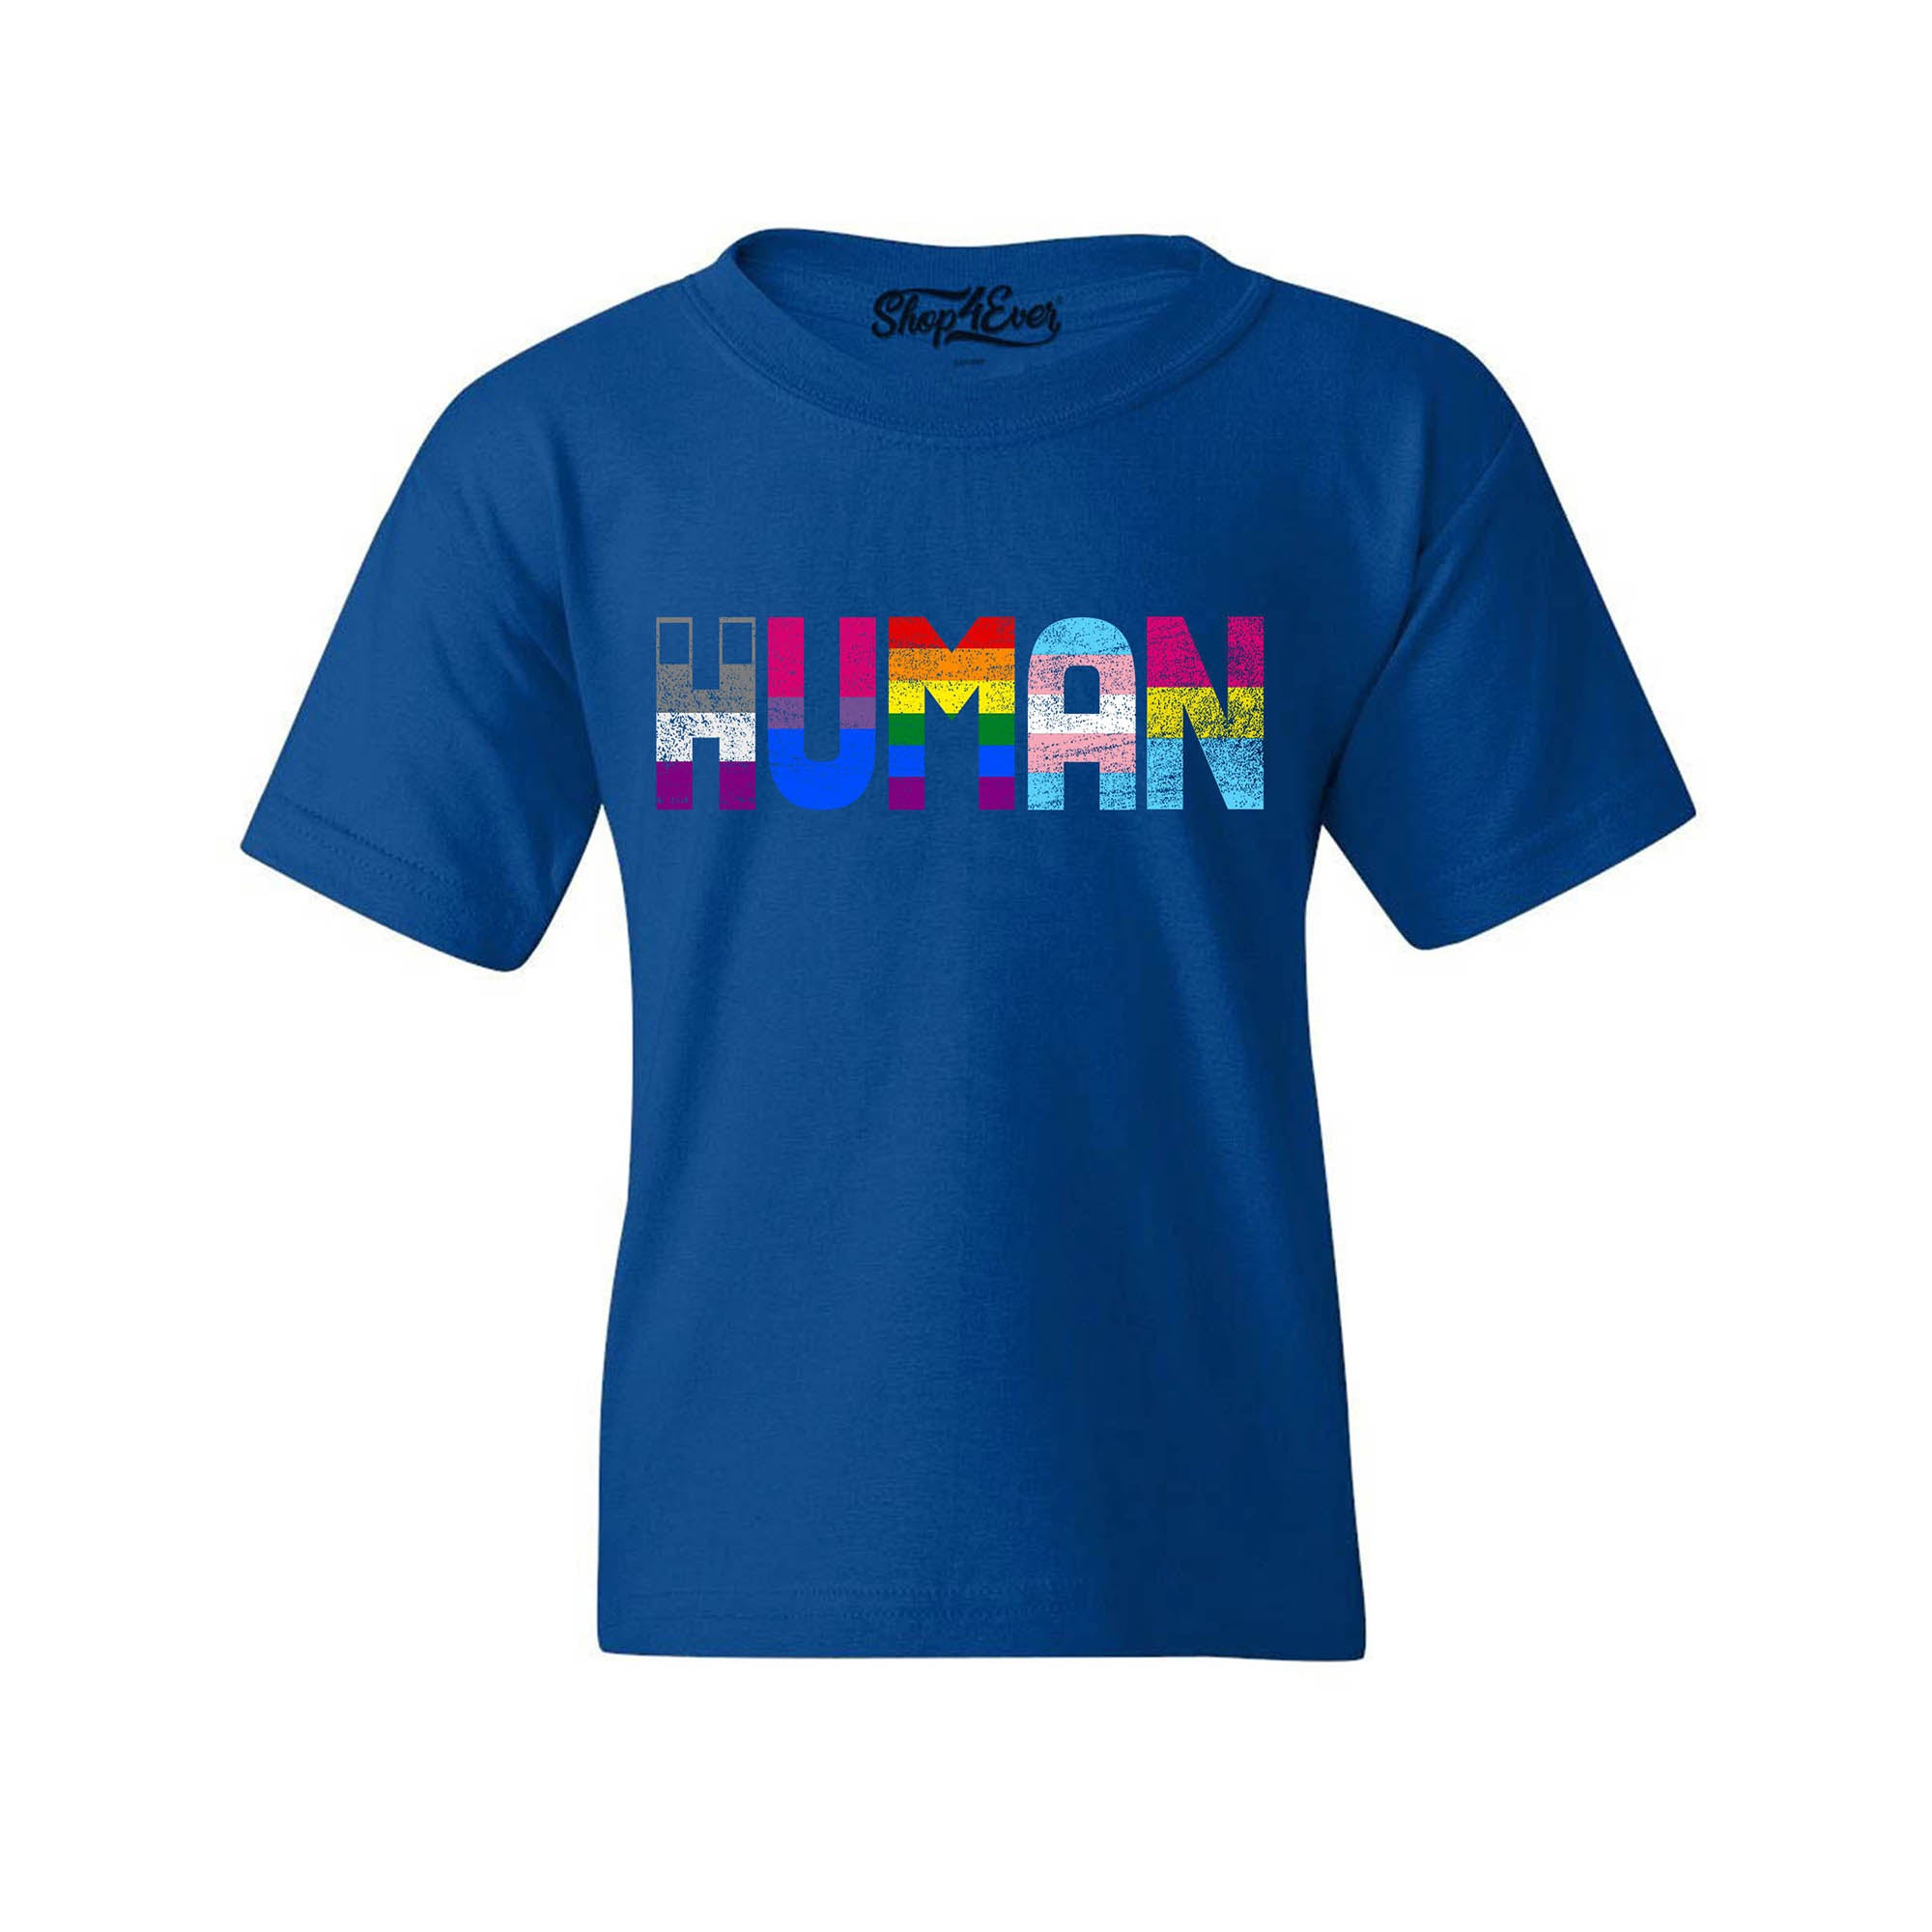 Human Pride Flags Youth's T-Shirt Child Kids Tee